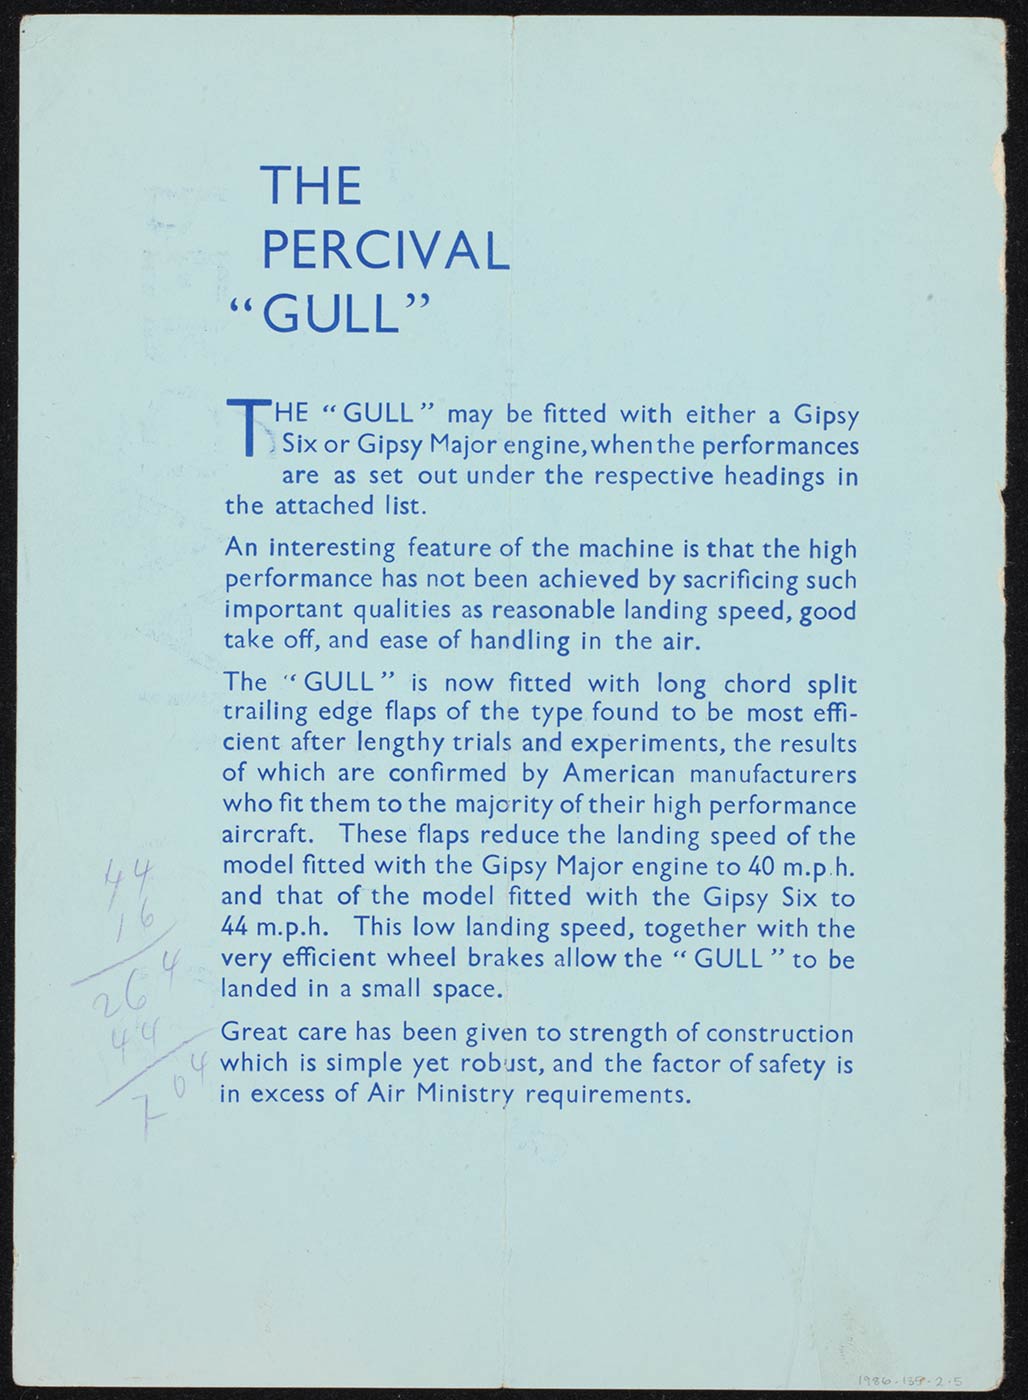 Copy of a pale blue advertising brochure for the Percival Gull aircraft. Text includes: 'The Gull may be fitted with either a Gipsy Six or Gipsy major engine, when the performances are set out under the respective headings in the attached list'. - click to view larger image